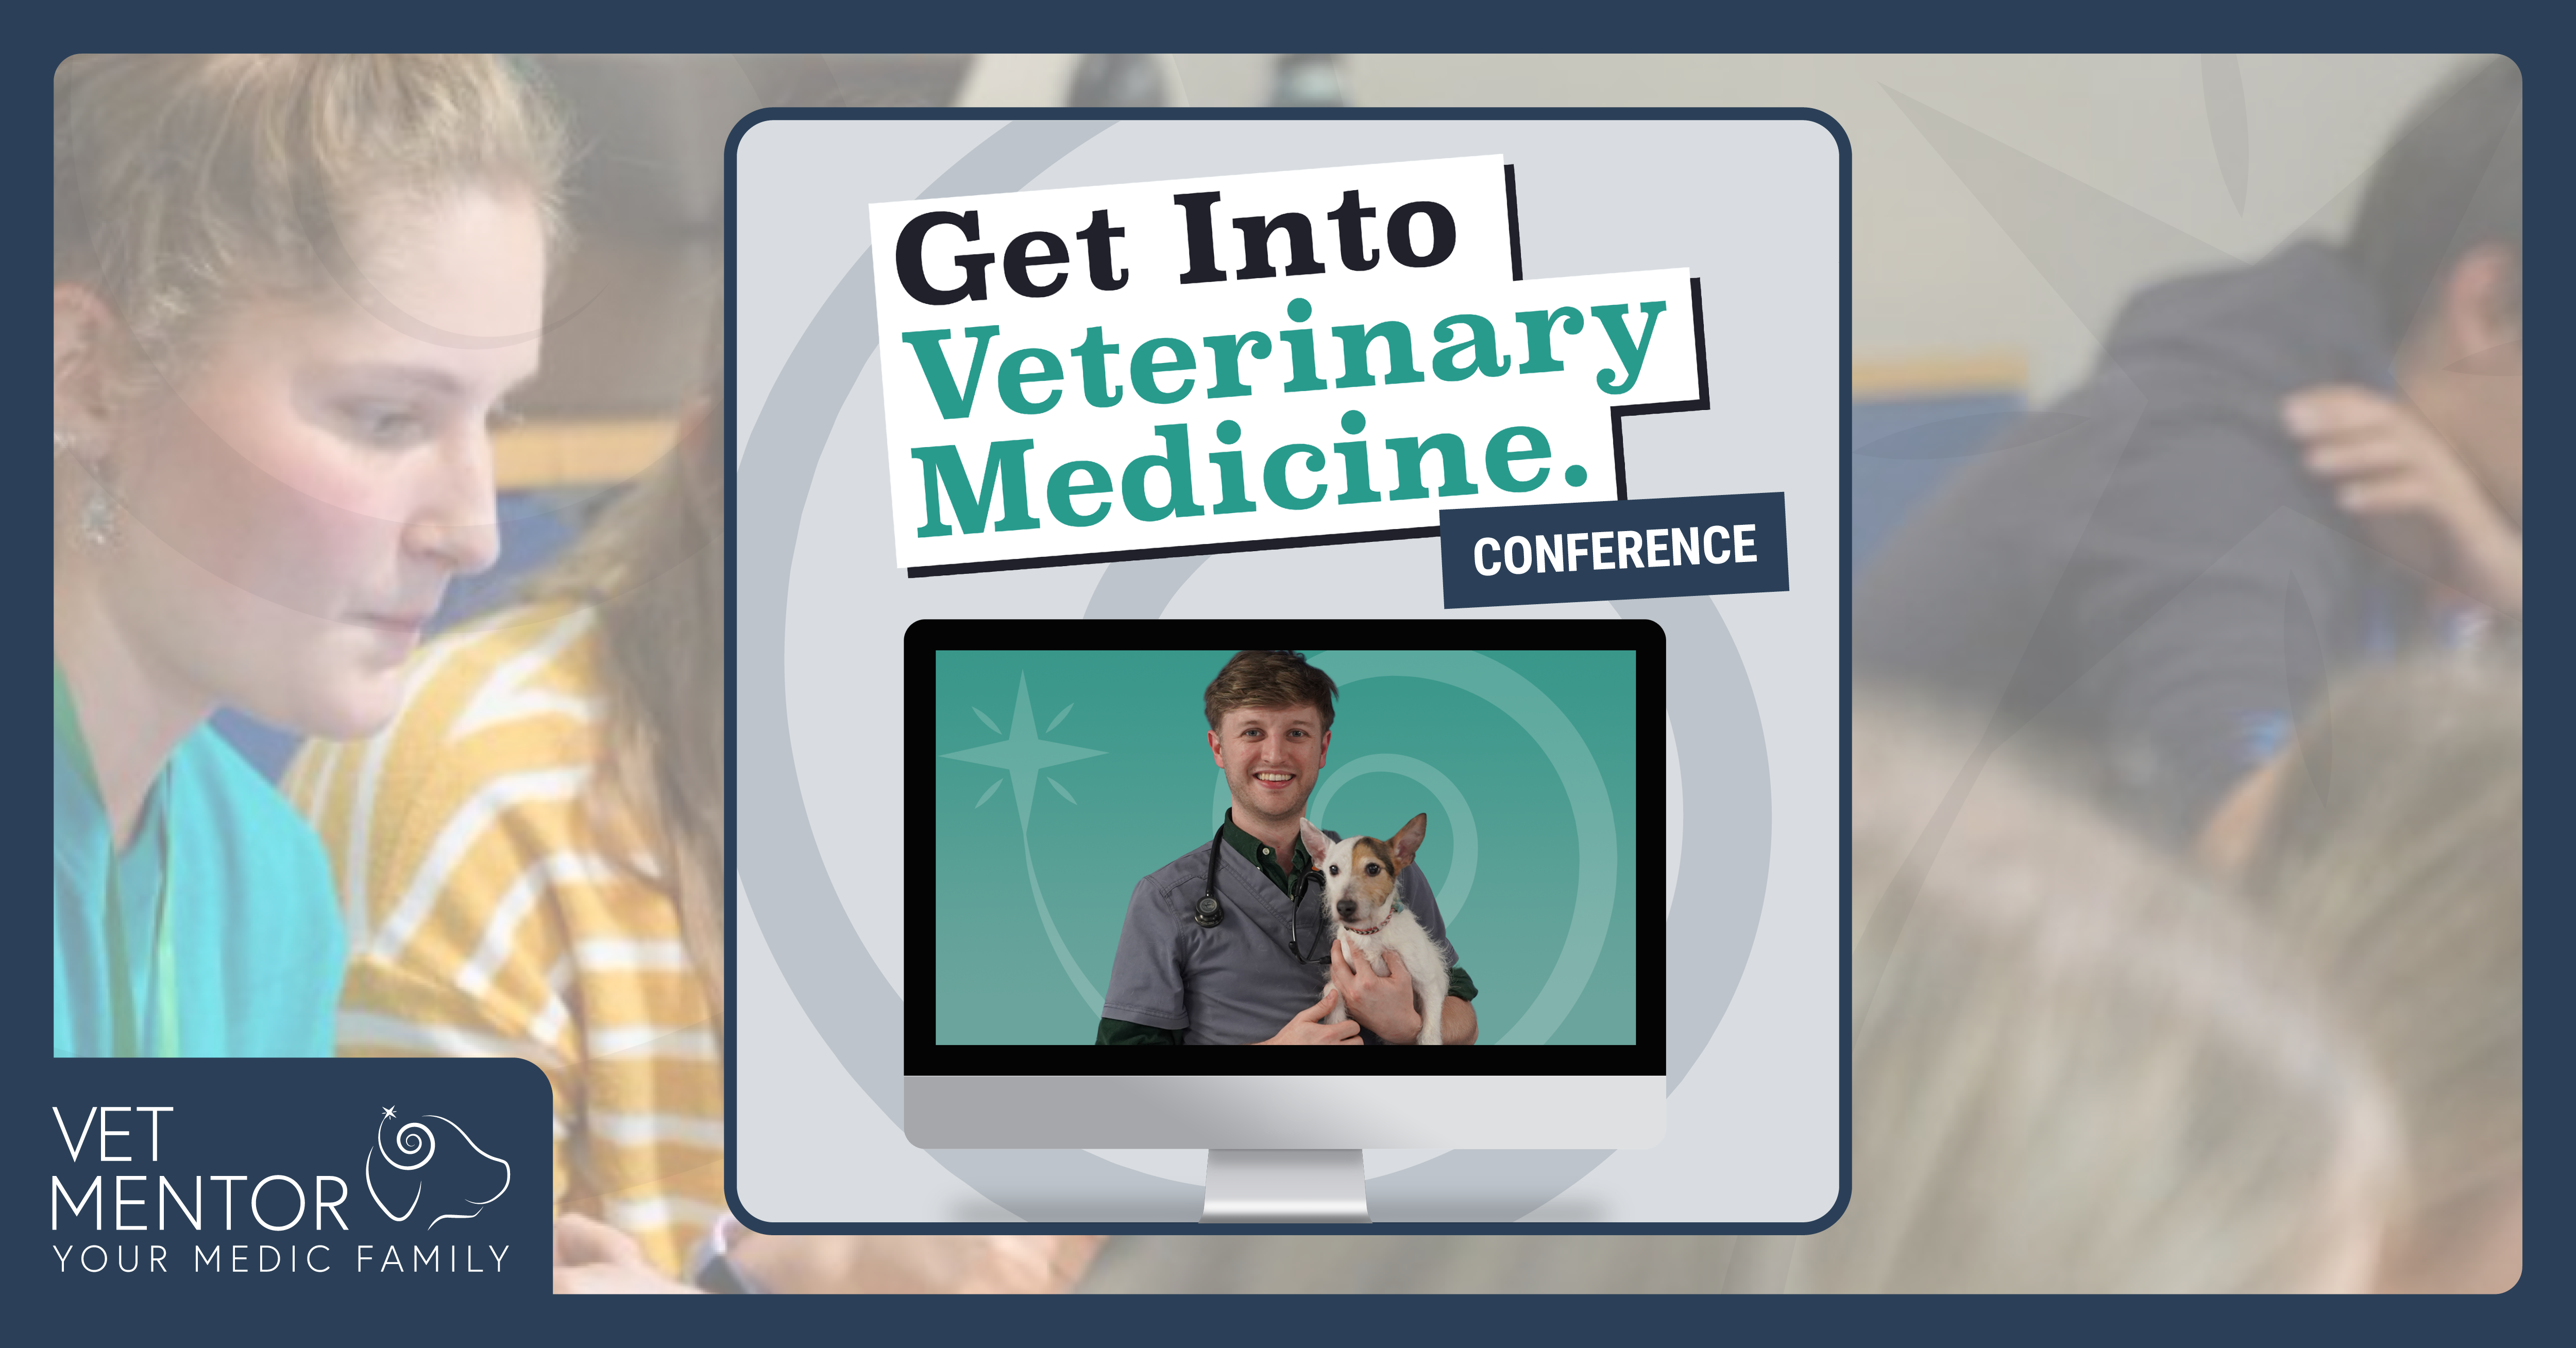 The Get Into Veterinary E-Learning Conference